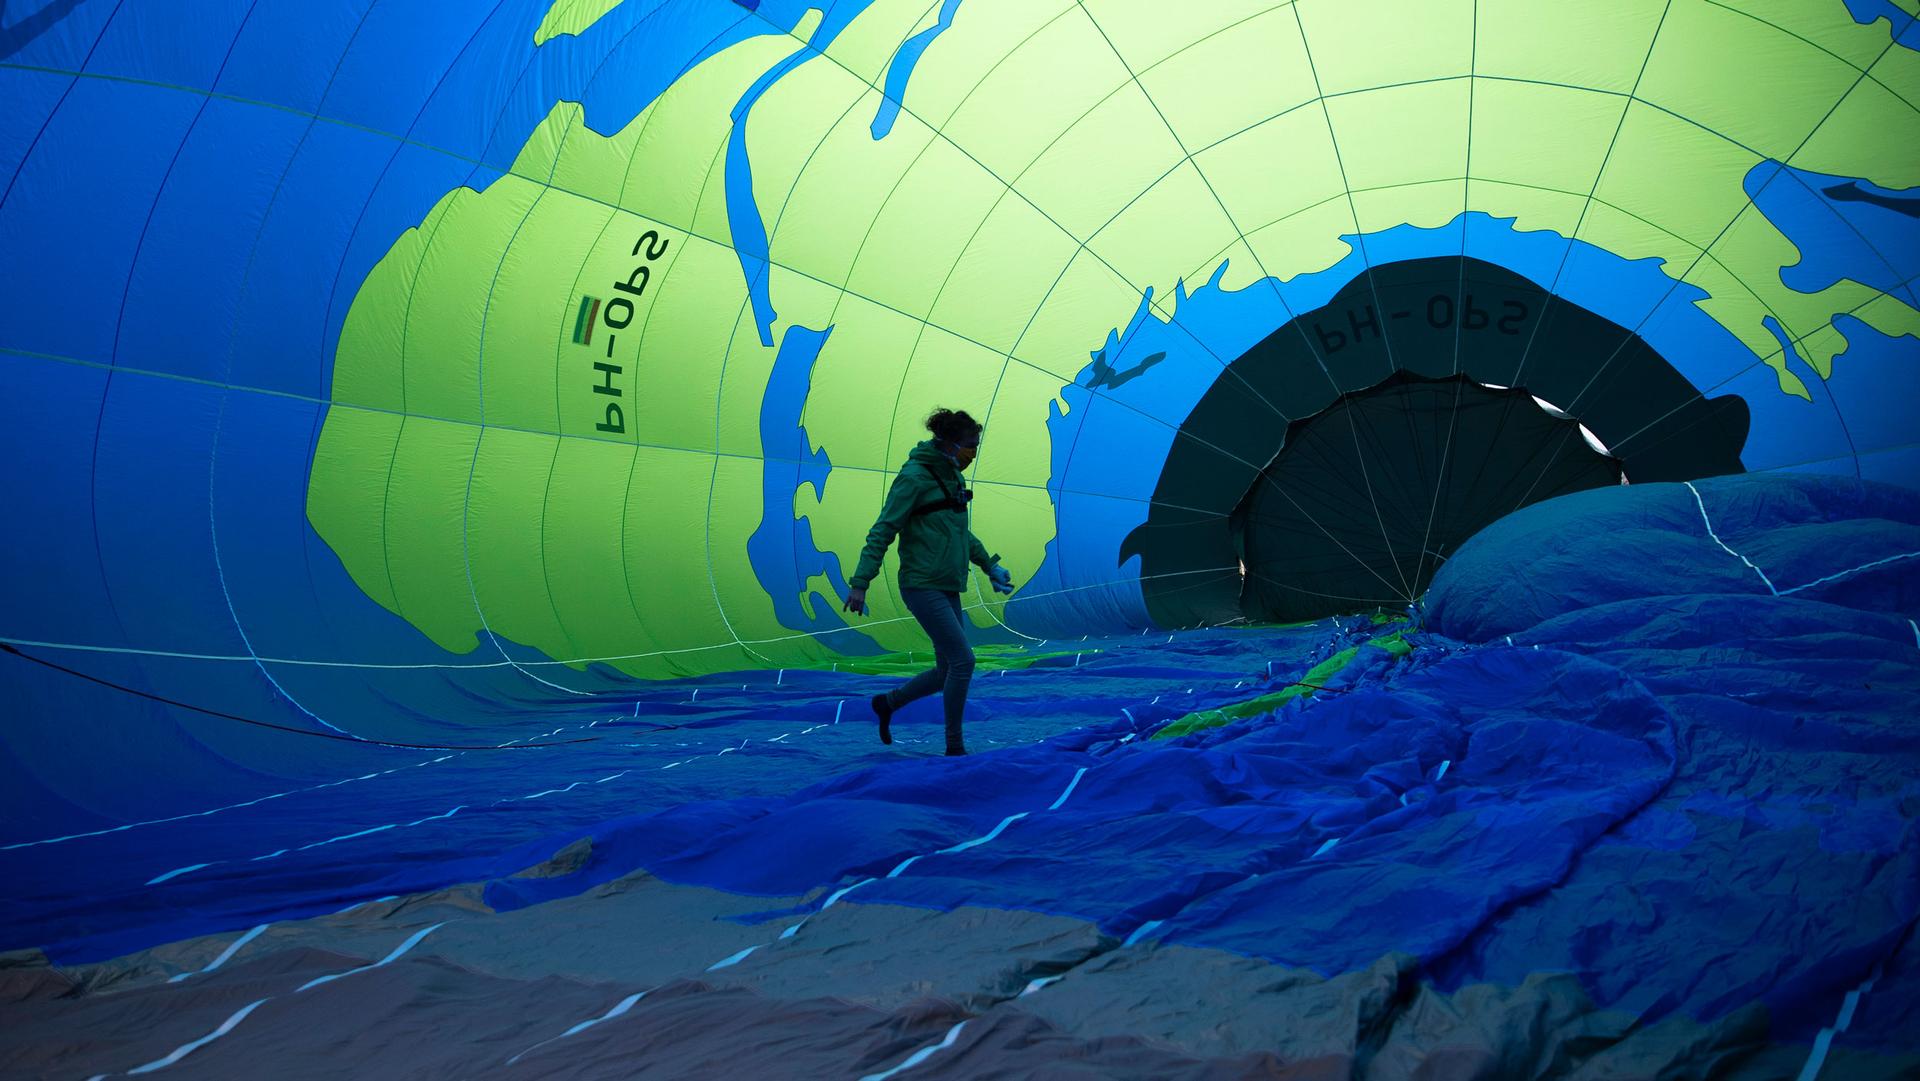 A person is shown in shadow walking on the fabric of a blue and green hot air balloon.